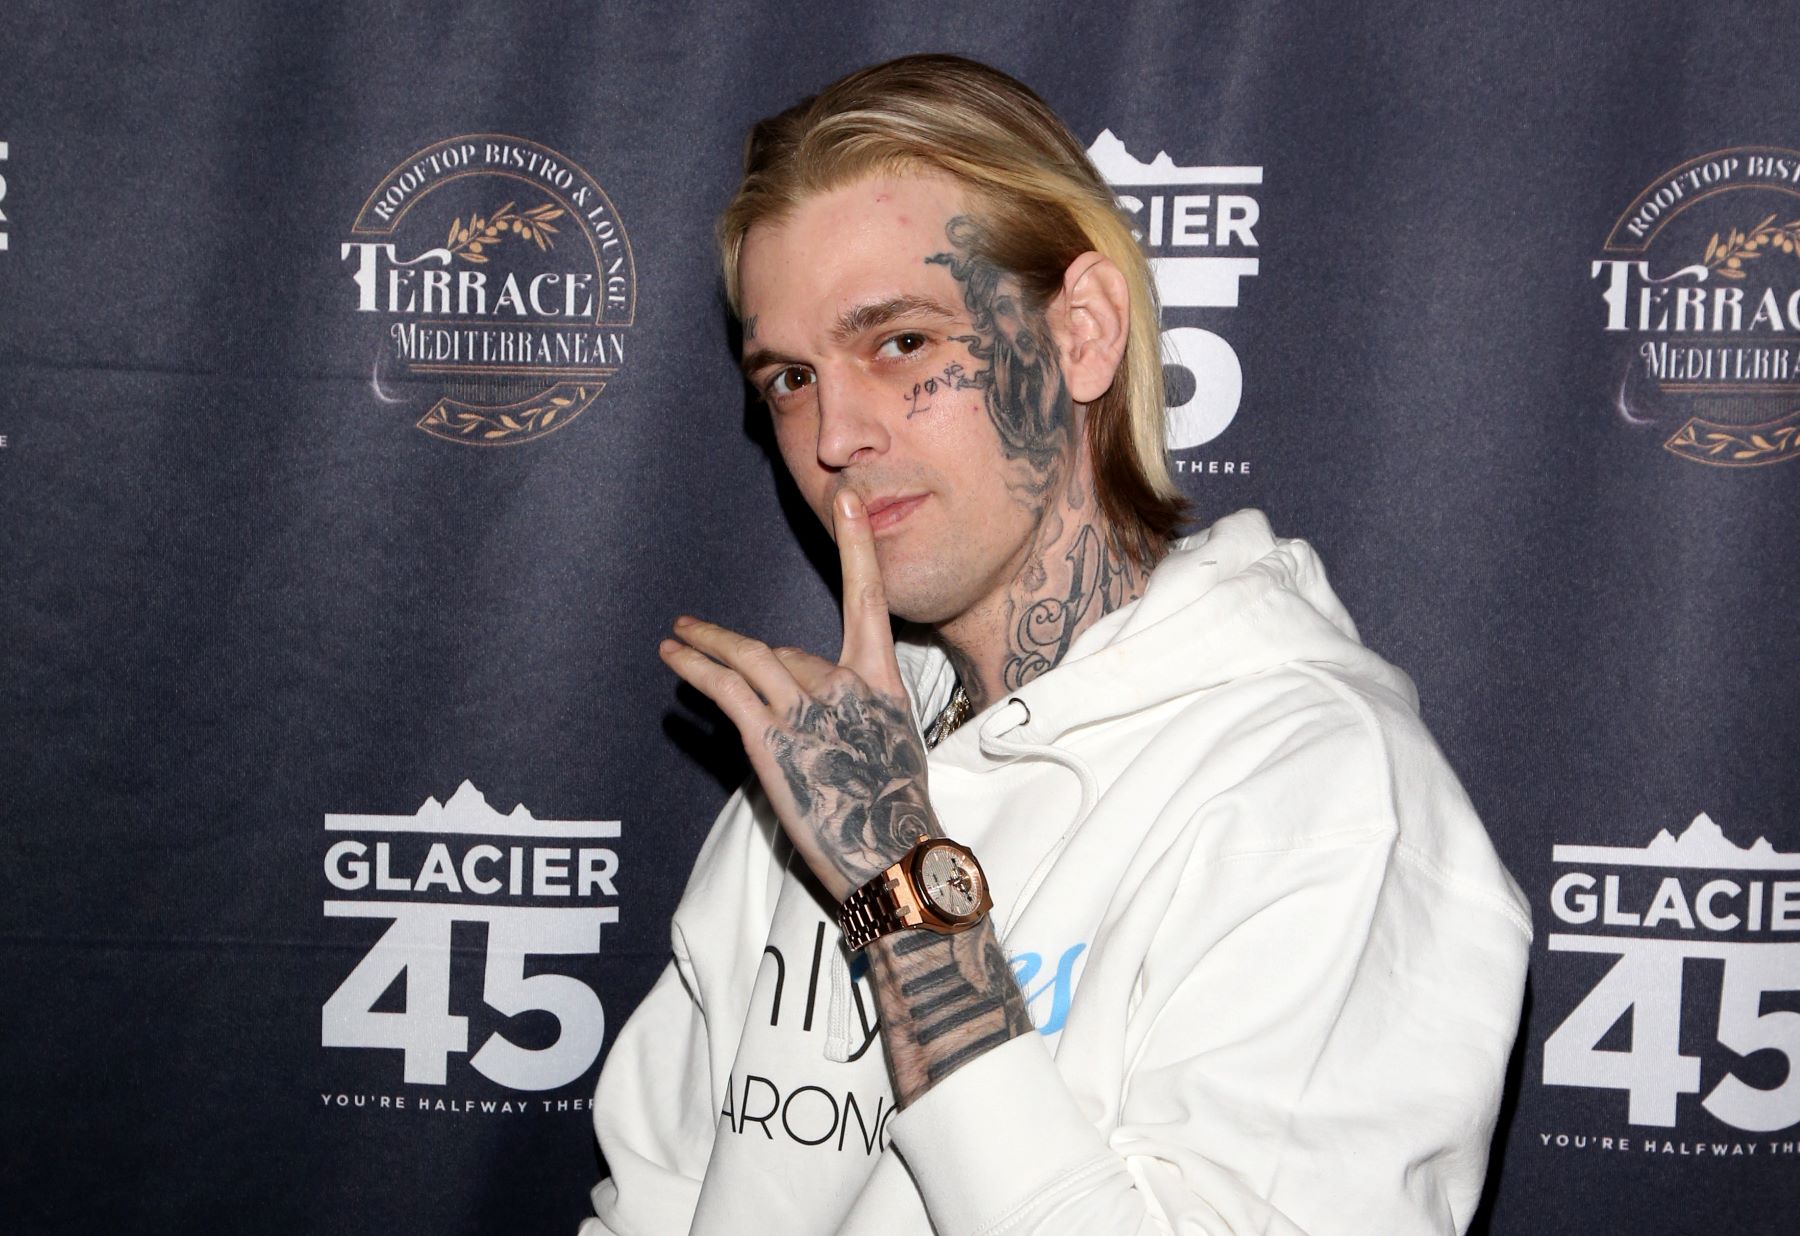 Singer Aaron Carter, who fought for emancipation from his parents, at Larry Flynt's Hustler Club